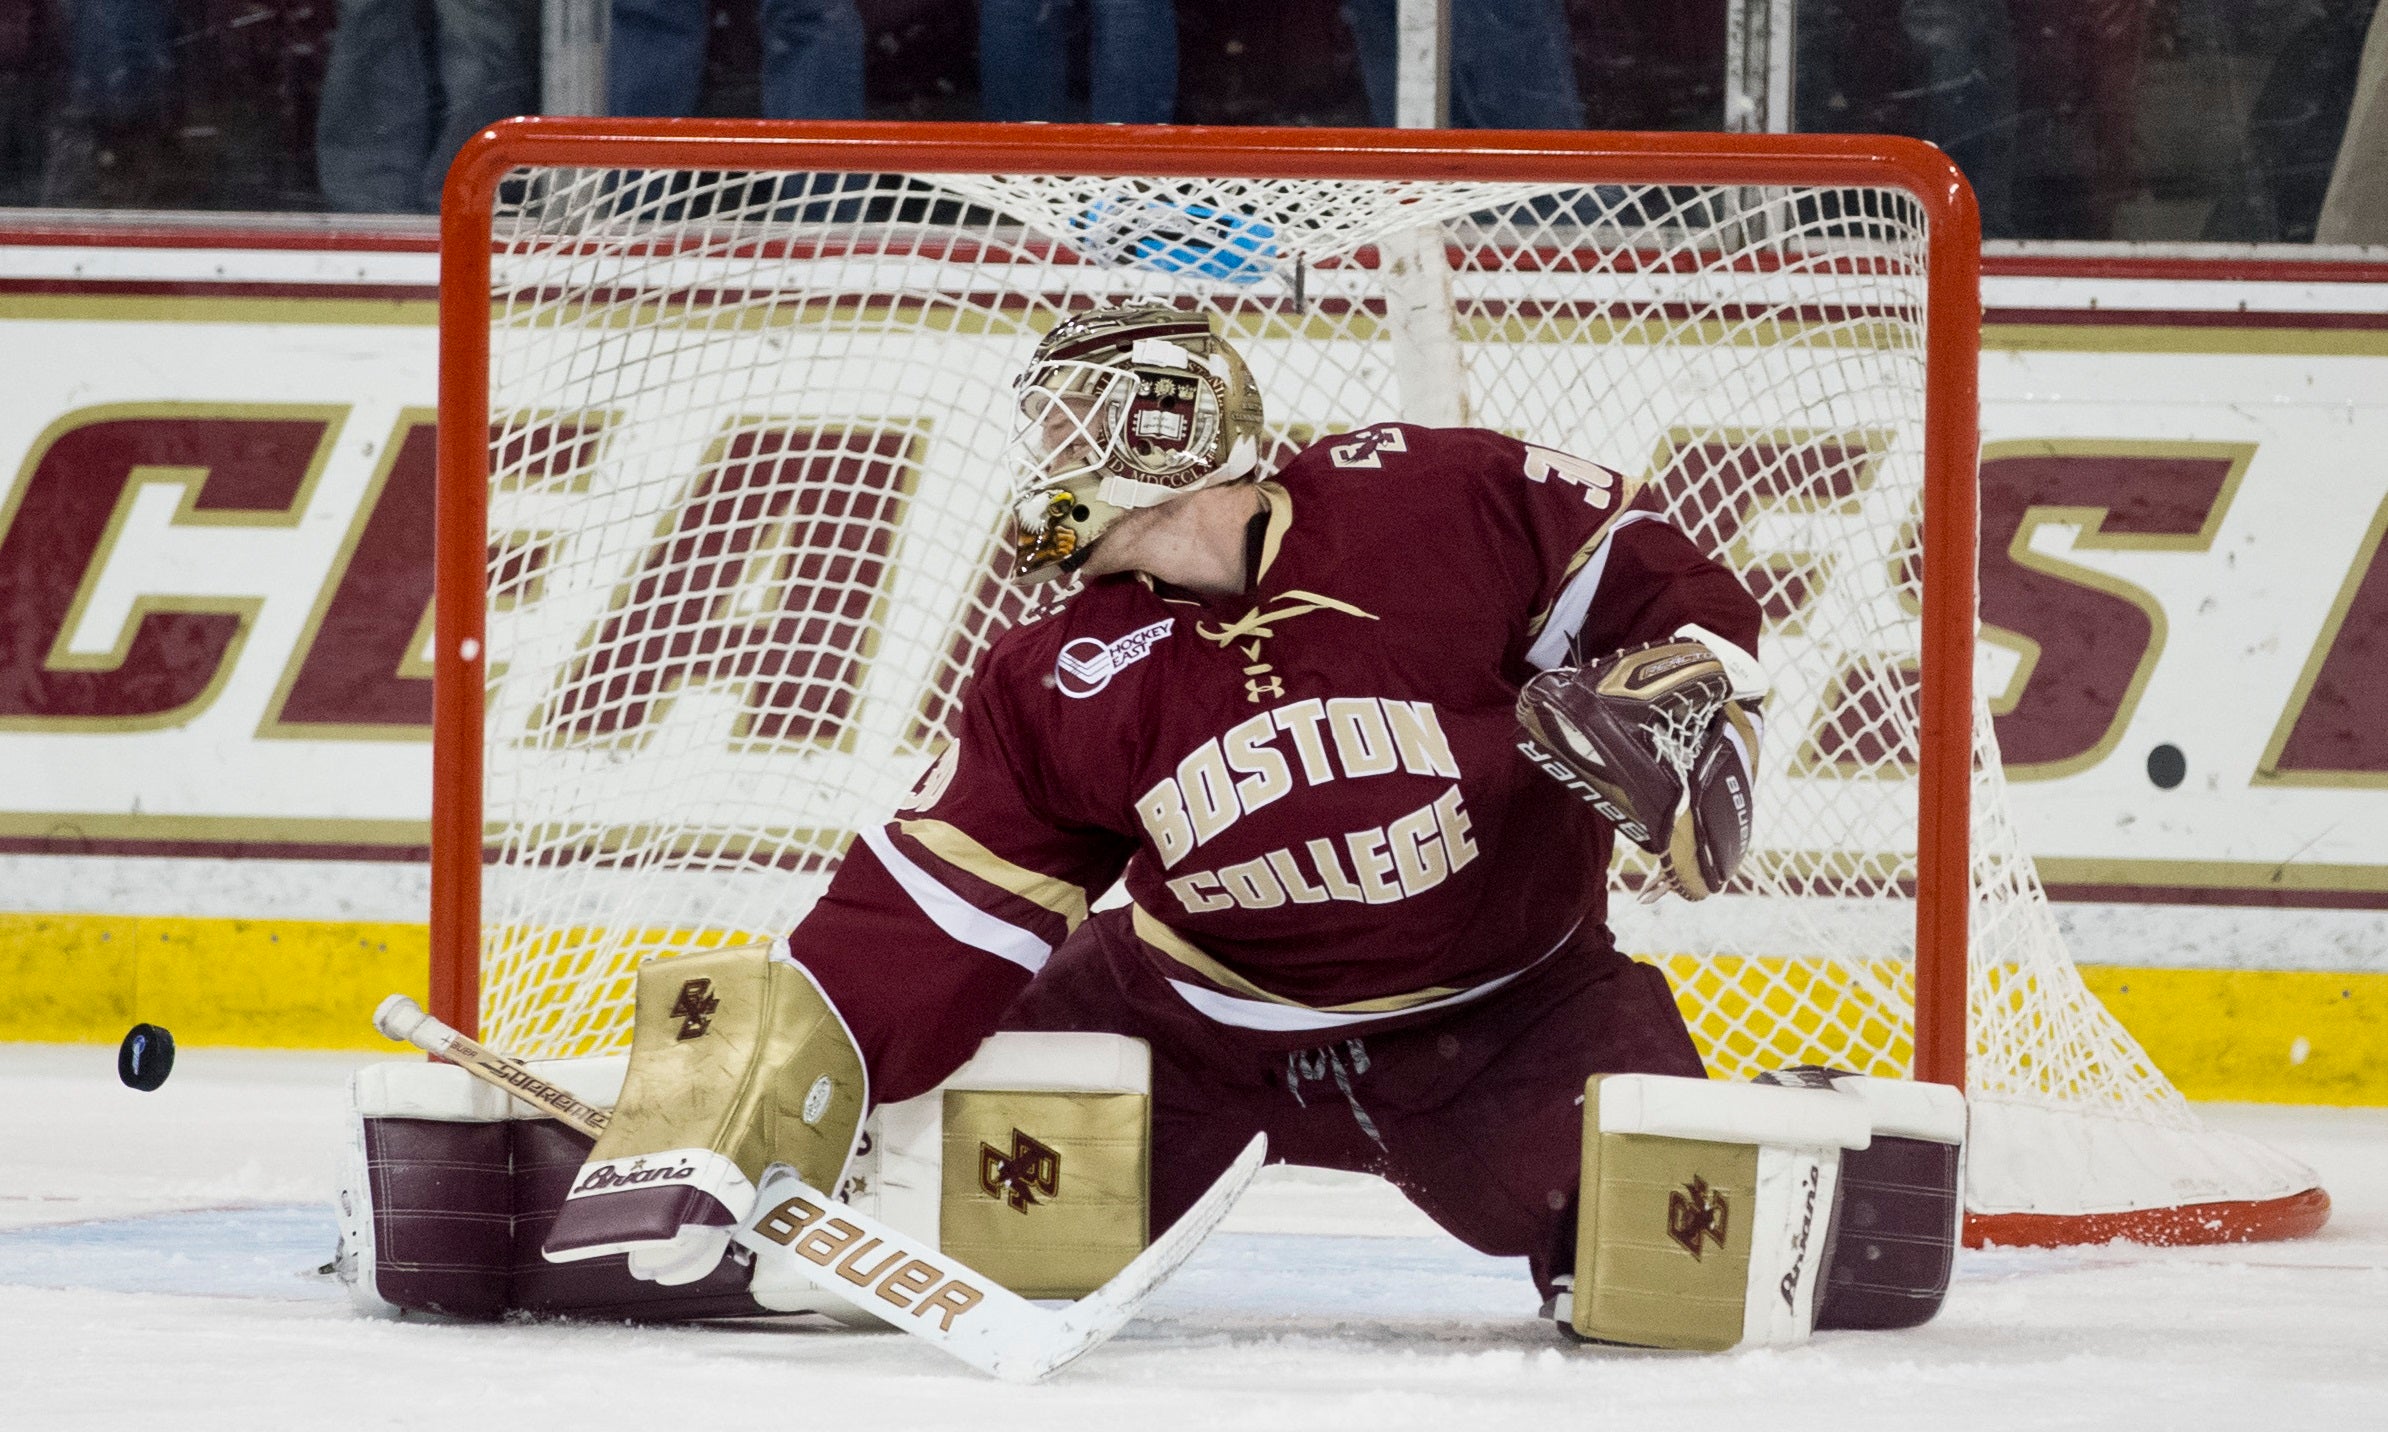 Notre Dame hockey team falls to UMass Lowell in Hockey East